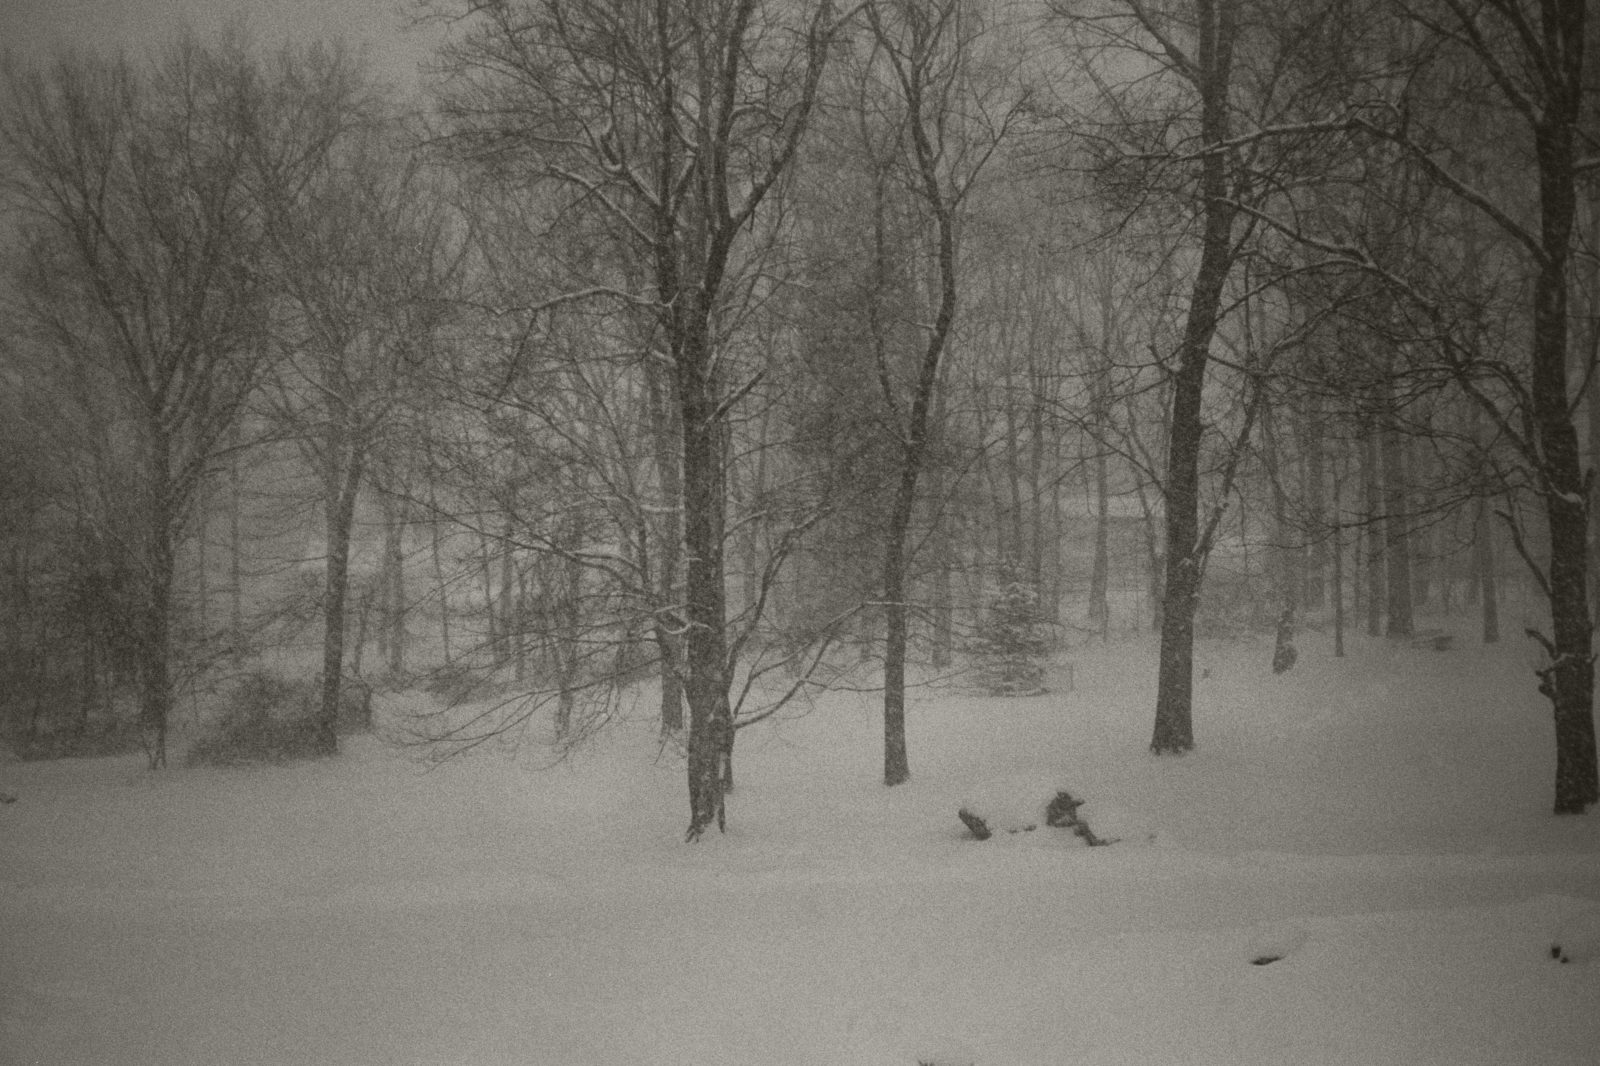 Black and white photograph of sparsely-forested land on a snowy day. Trees dominate the upper two-thirds of the photograph. A snowy field dominates the bottom third.